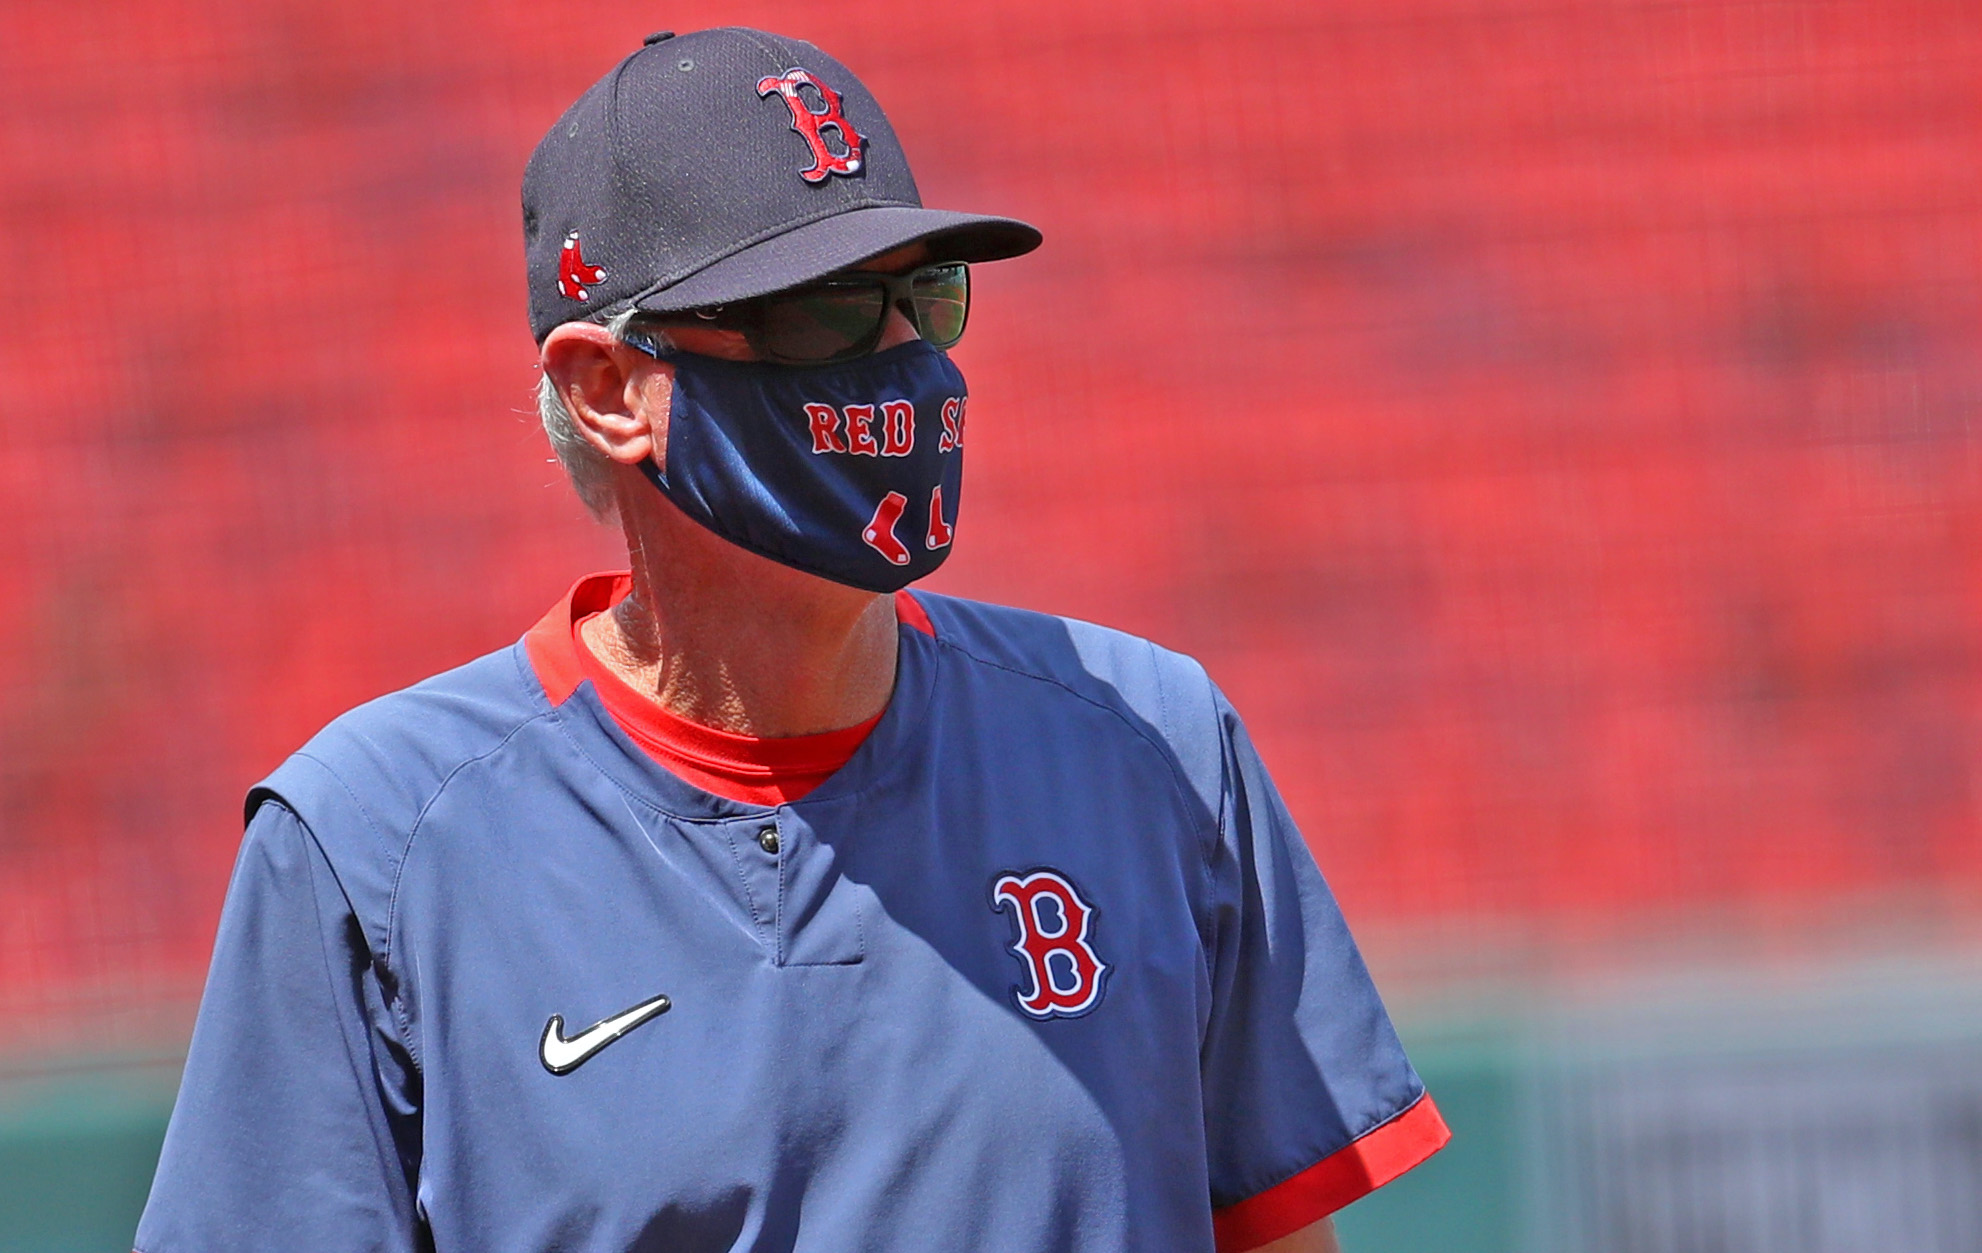 BOSTON, MASSACHUSETTS - JULY 09: Red Sox Manager Ron Roenicke looks on during Summer Workouts at Fenway Park on July 09, 2020 in Boston, Massachusetts. (Photo by Maddie Meyer/Getty Images)